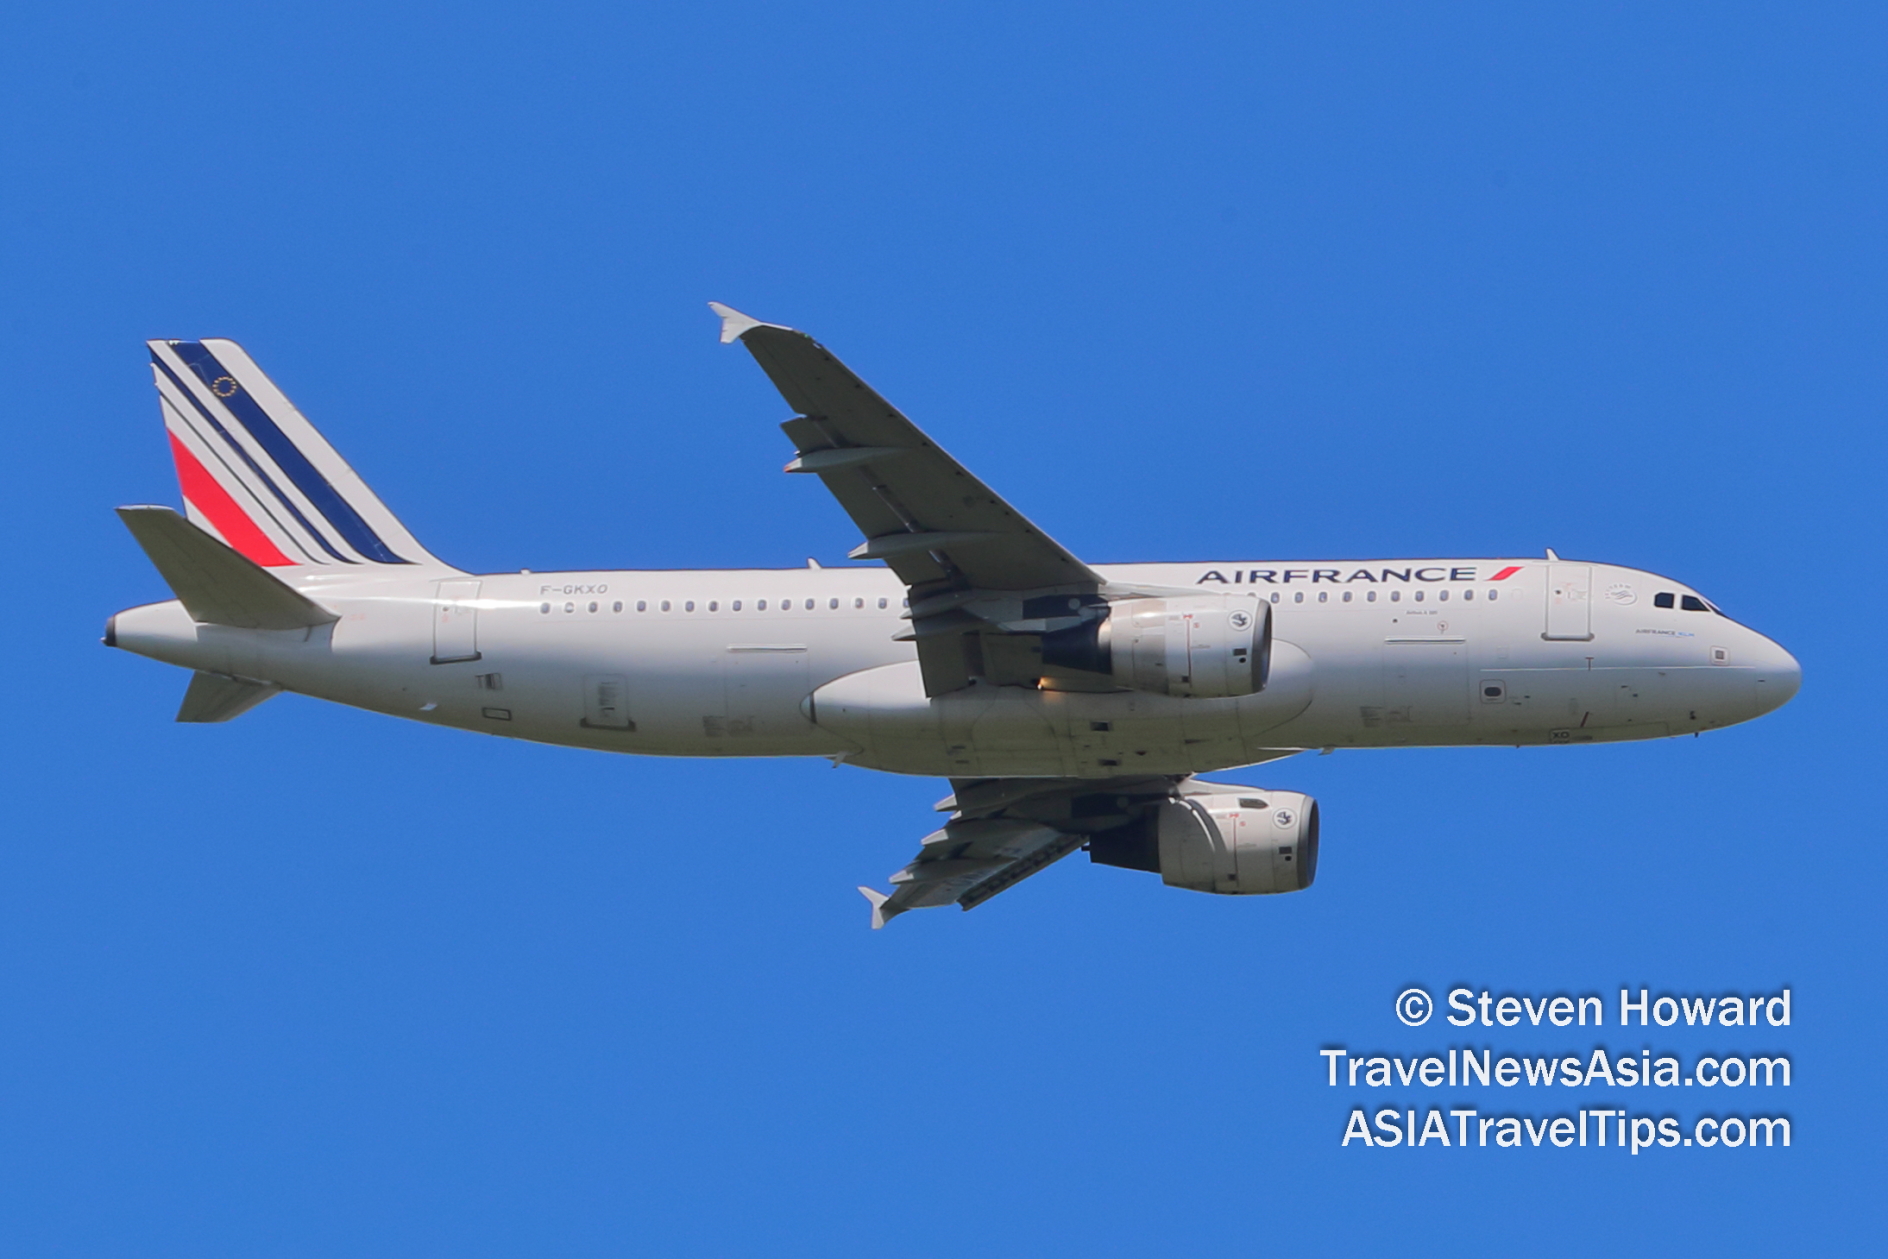 Air France A320 reg: F-GKXO. Picture by Steven Howard of TravelNewsAsia.com Click to enlarge.